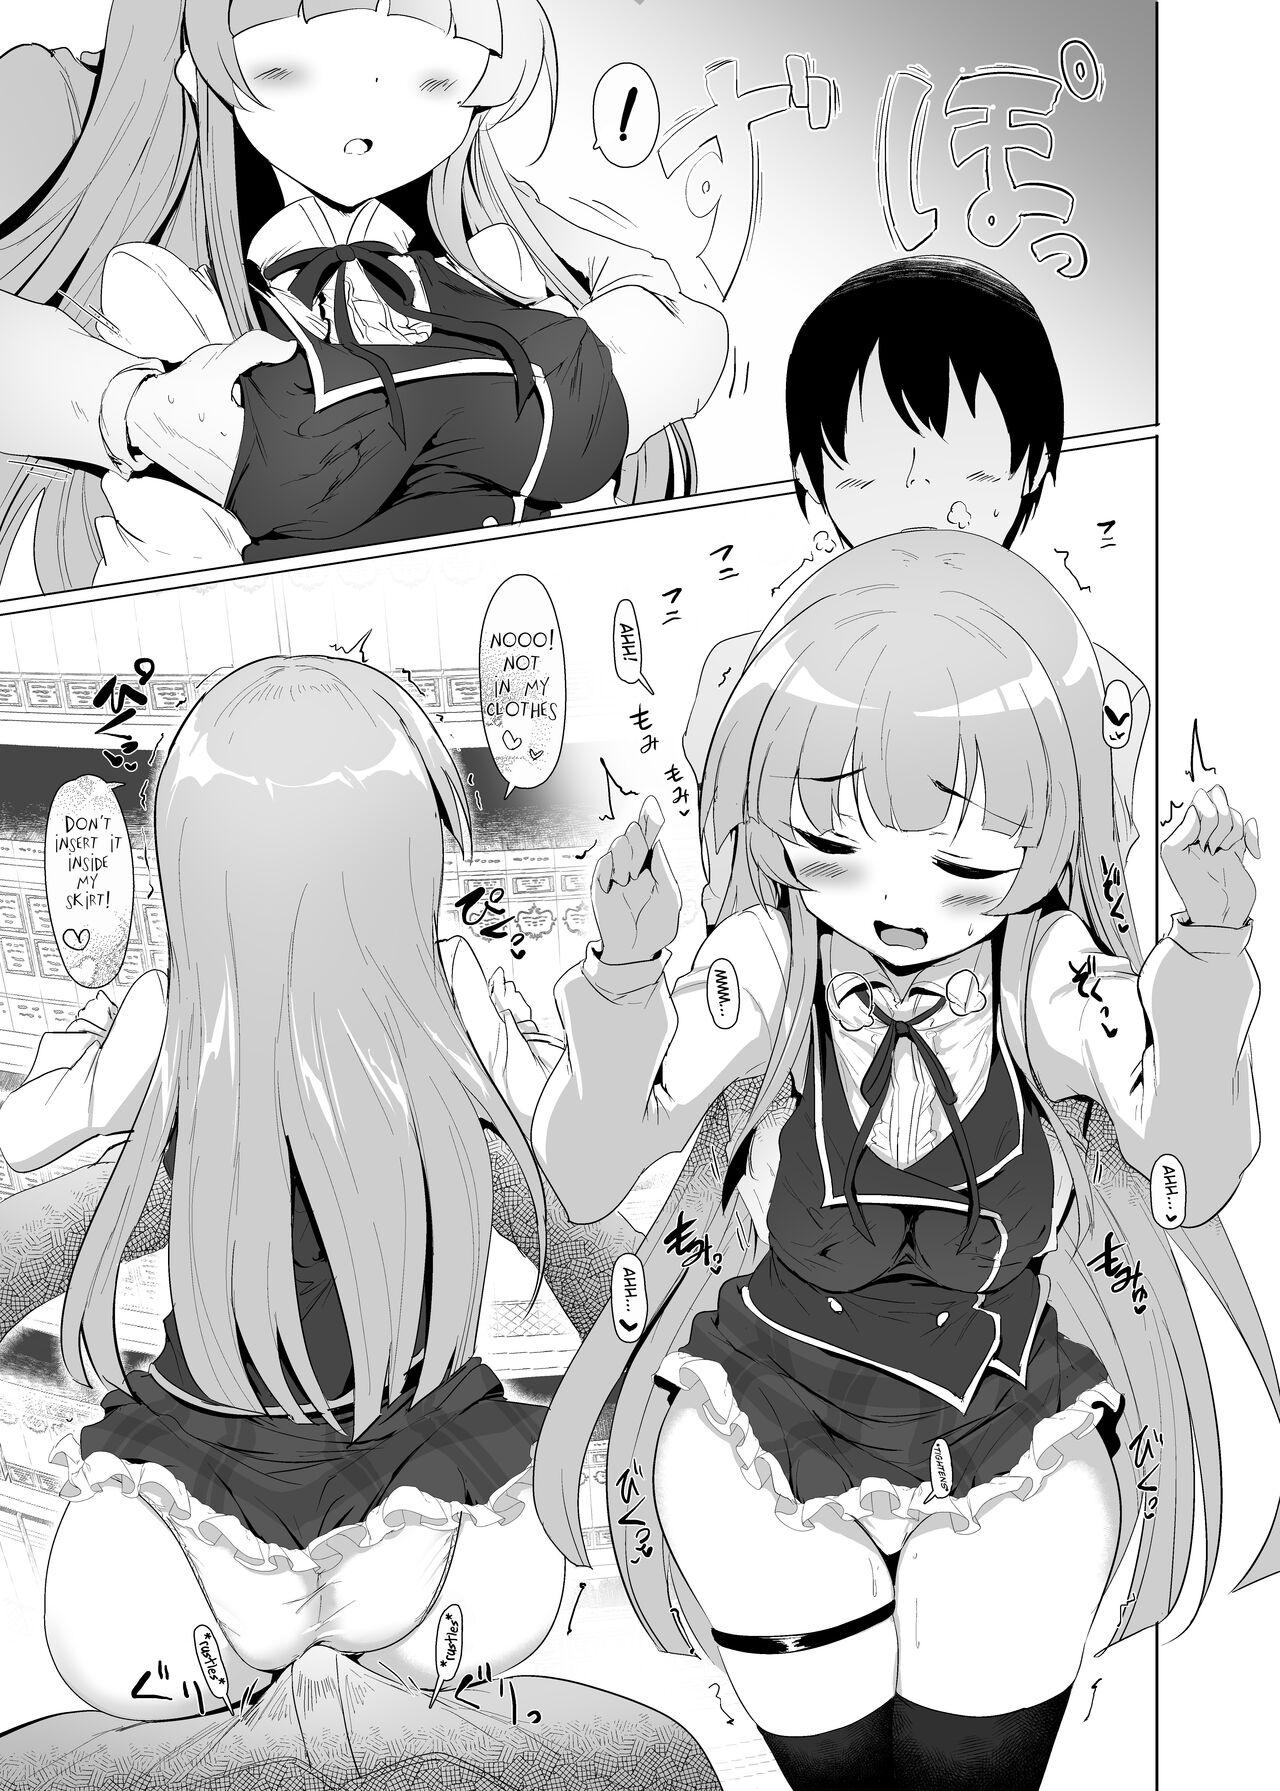 Real There's No Way An Ecchi Event Will Happen Between Me and the Princess of Manaria Kingdom! 2 - Manaria friends Hair - Page 11